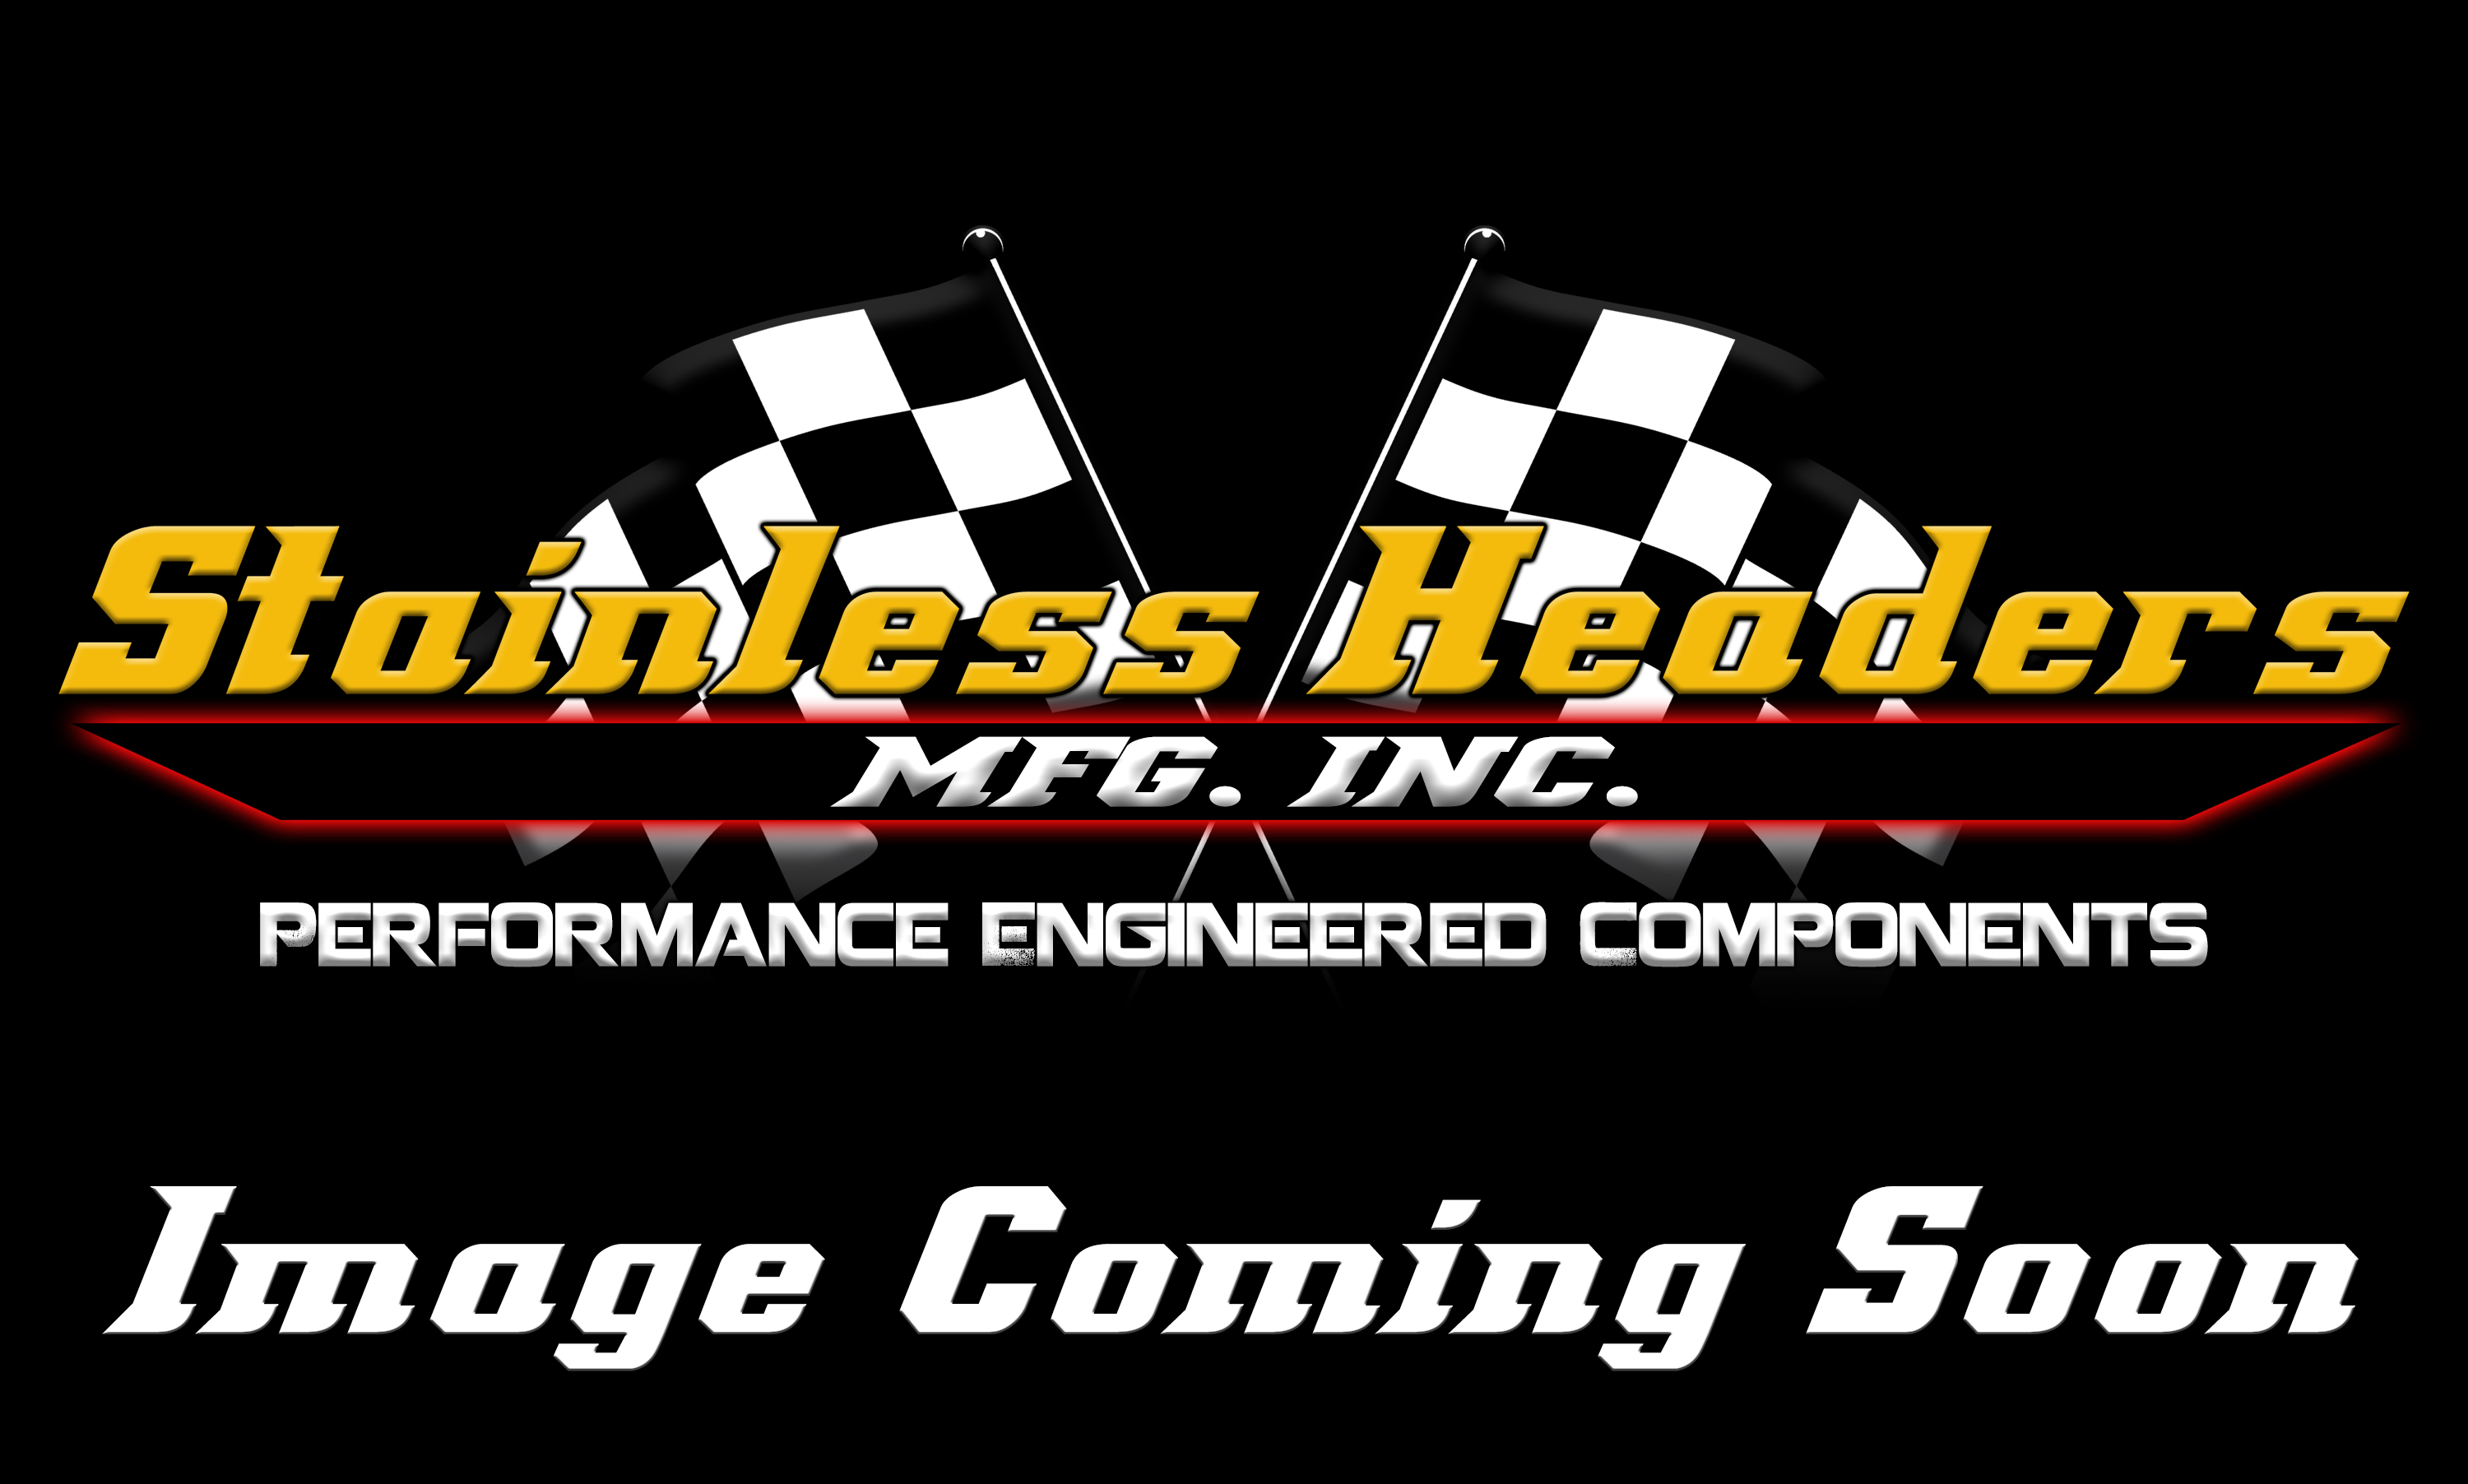 CompTurbo Technologies - CTR4818R-8090 Mid Frame Oil-Less 3.0 Turbocharger (1350 HP)